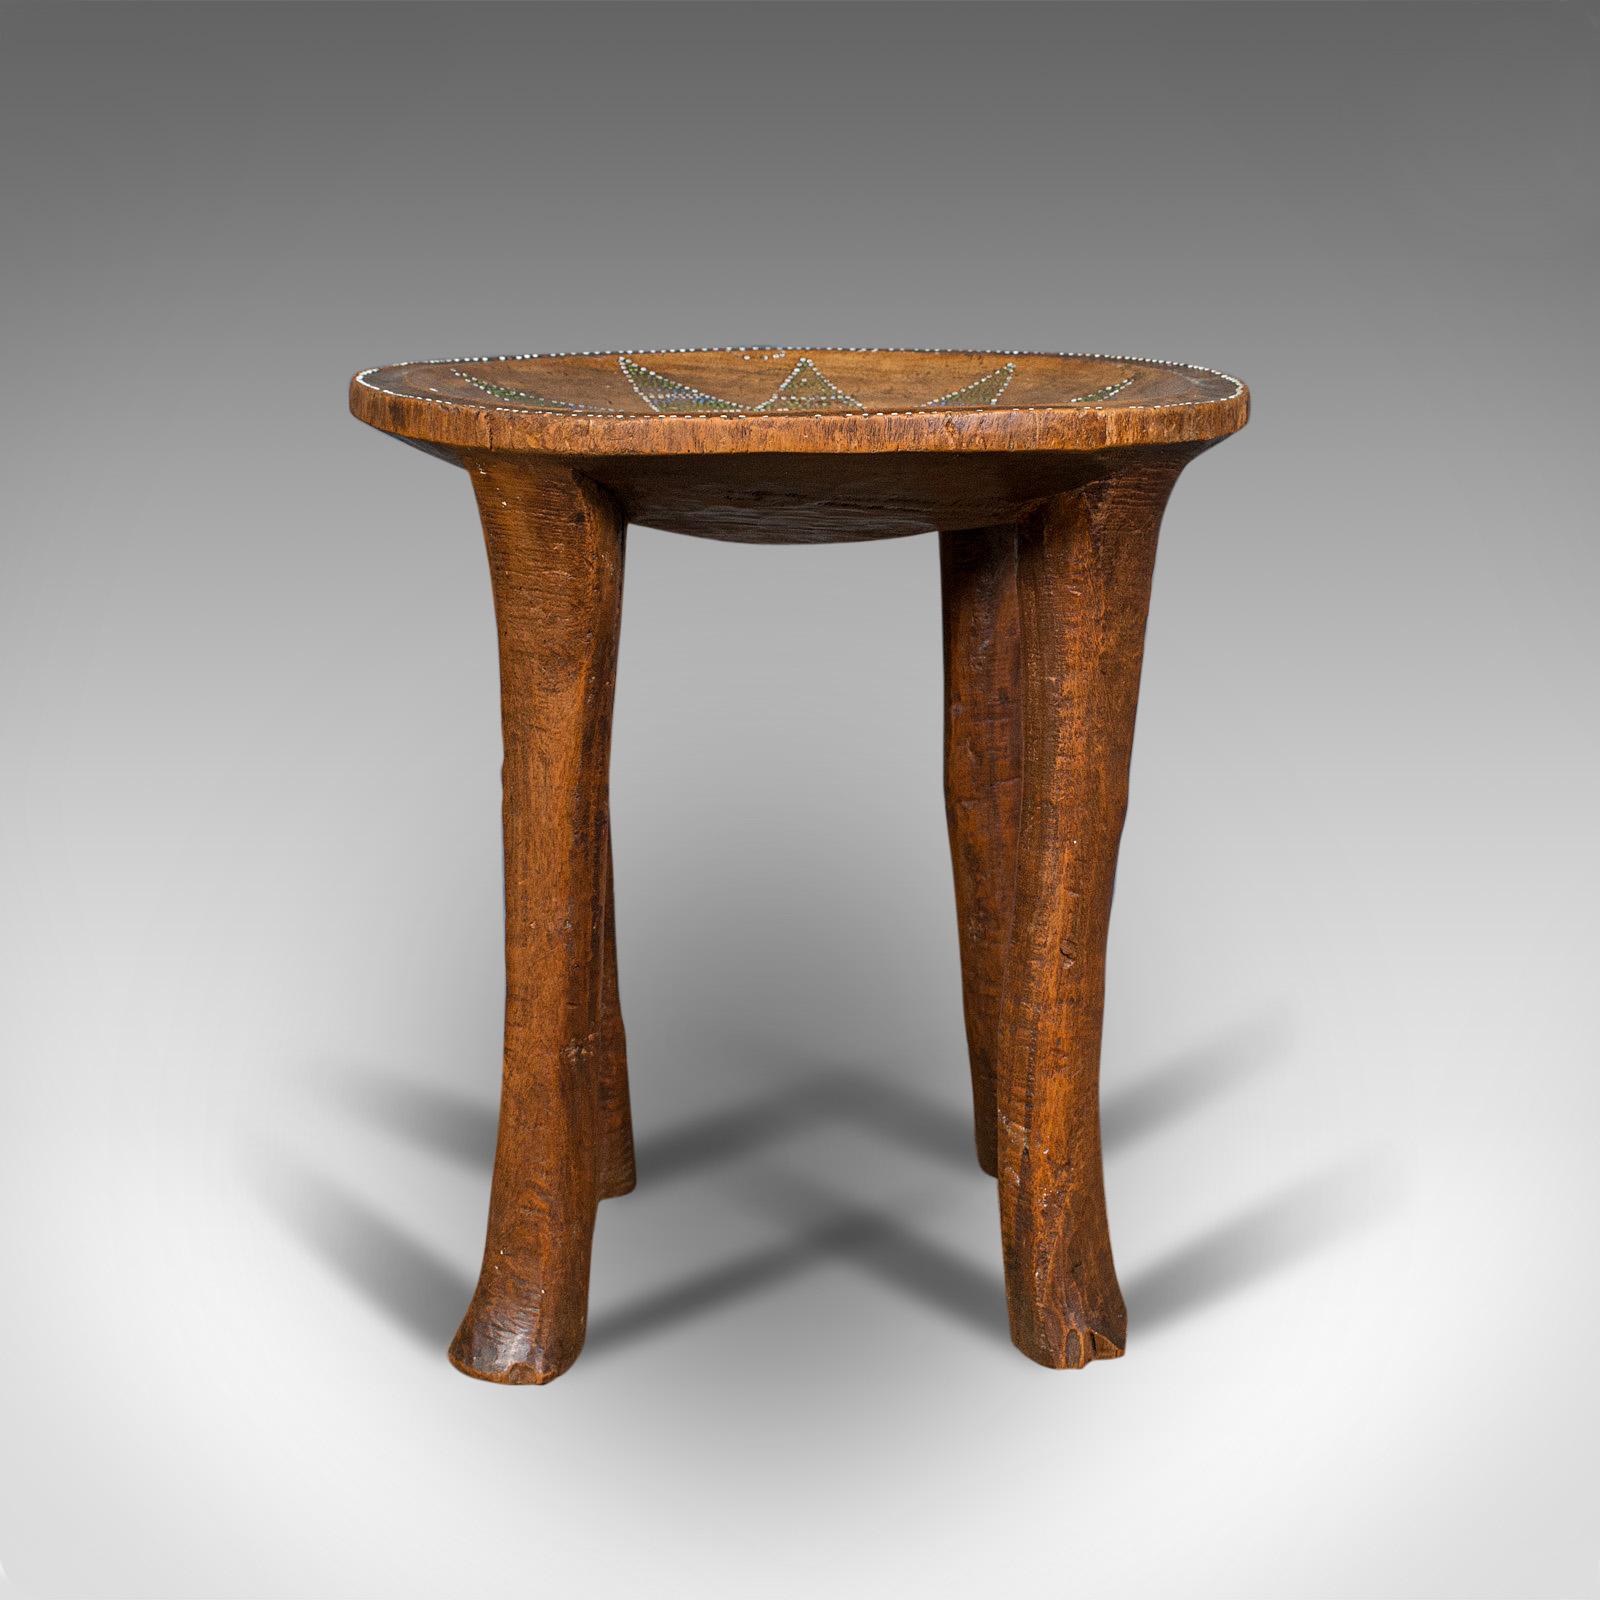 This is a small antique tribal side table. An Australian, fruitwood lamp table or stool, dating to the late Victorian period, circa 1900.

Naive indigenous charm and pleasingly decorated top
Displaying a desirable aged patina
Hand-carved